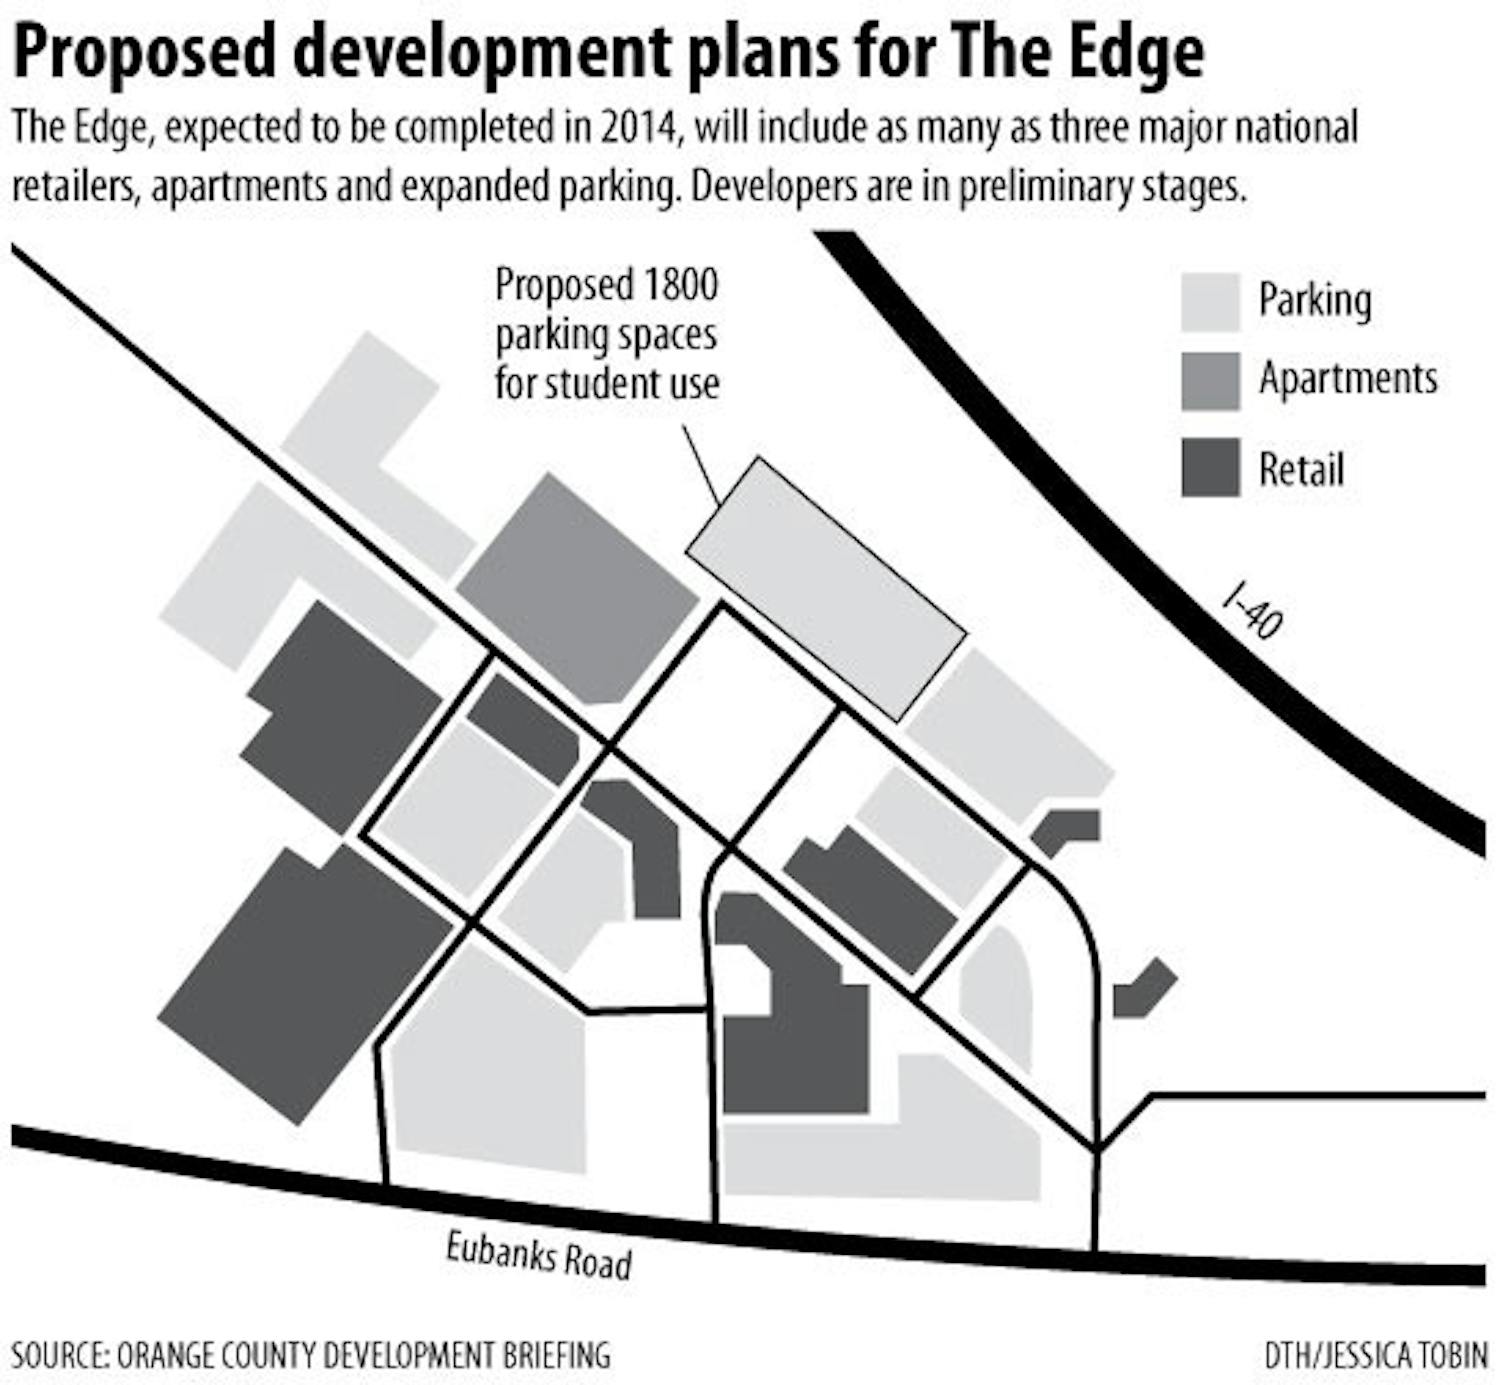 Photo: Chapel Hill’s 'The Edge' development could bring national retailers (Pete Mills)